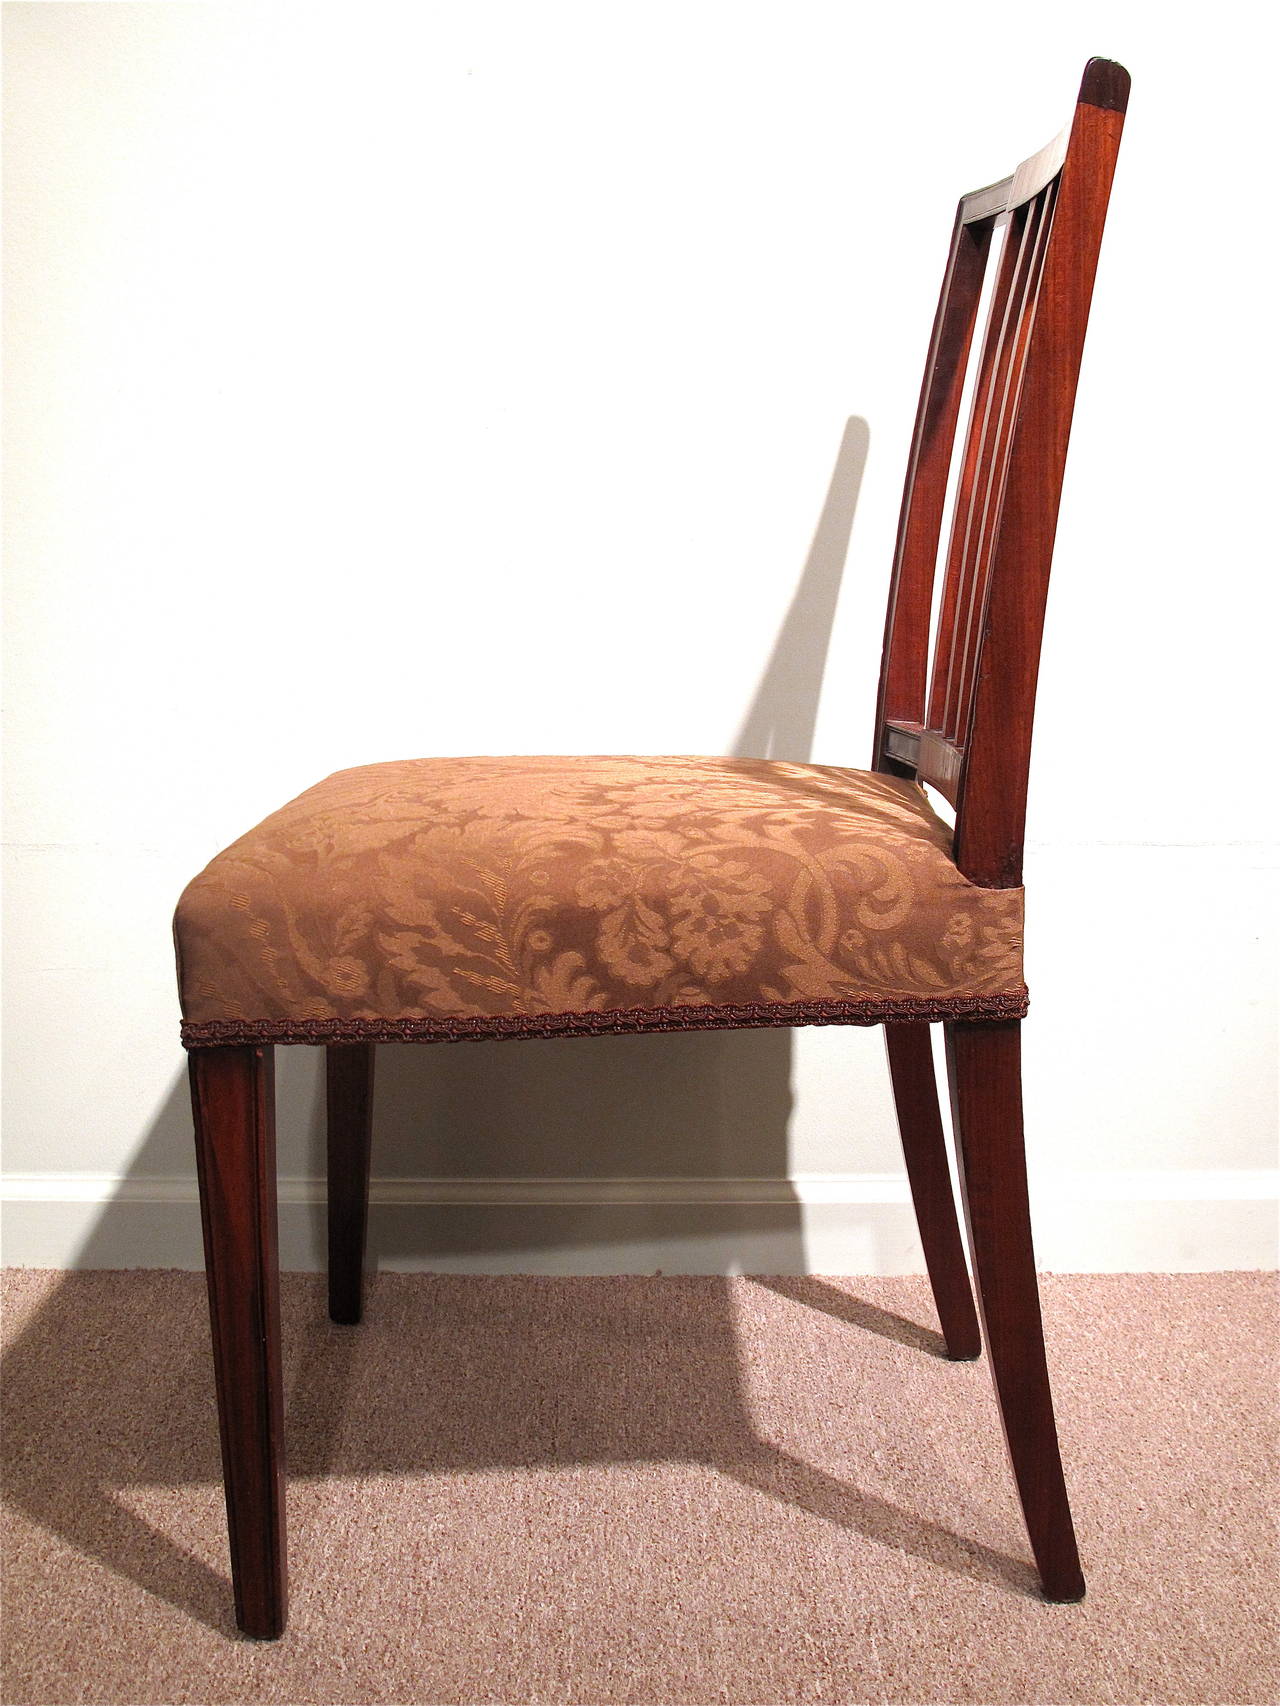 Set of Ten George III Dining Chairs in Mahogany and Satinwood, Late 18th Century For Sale 2